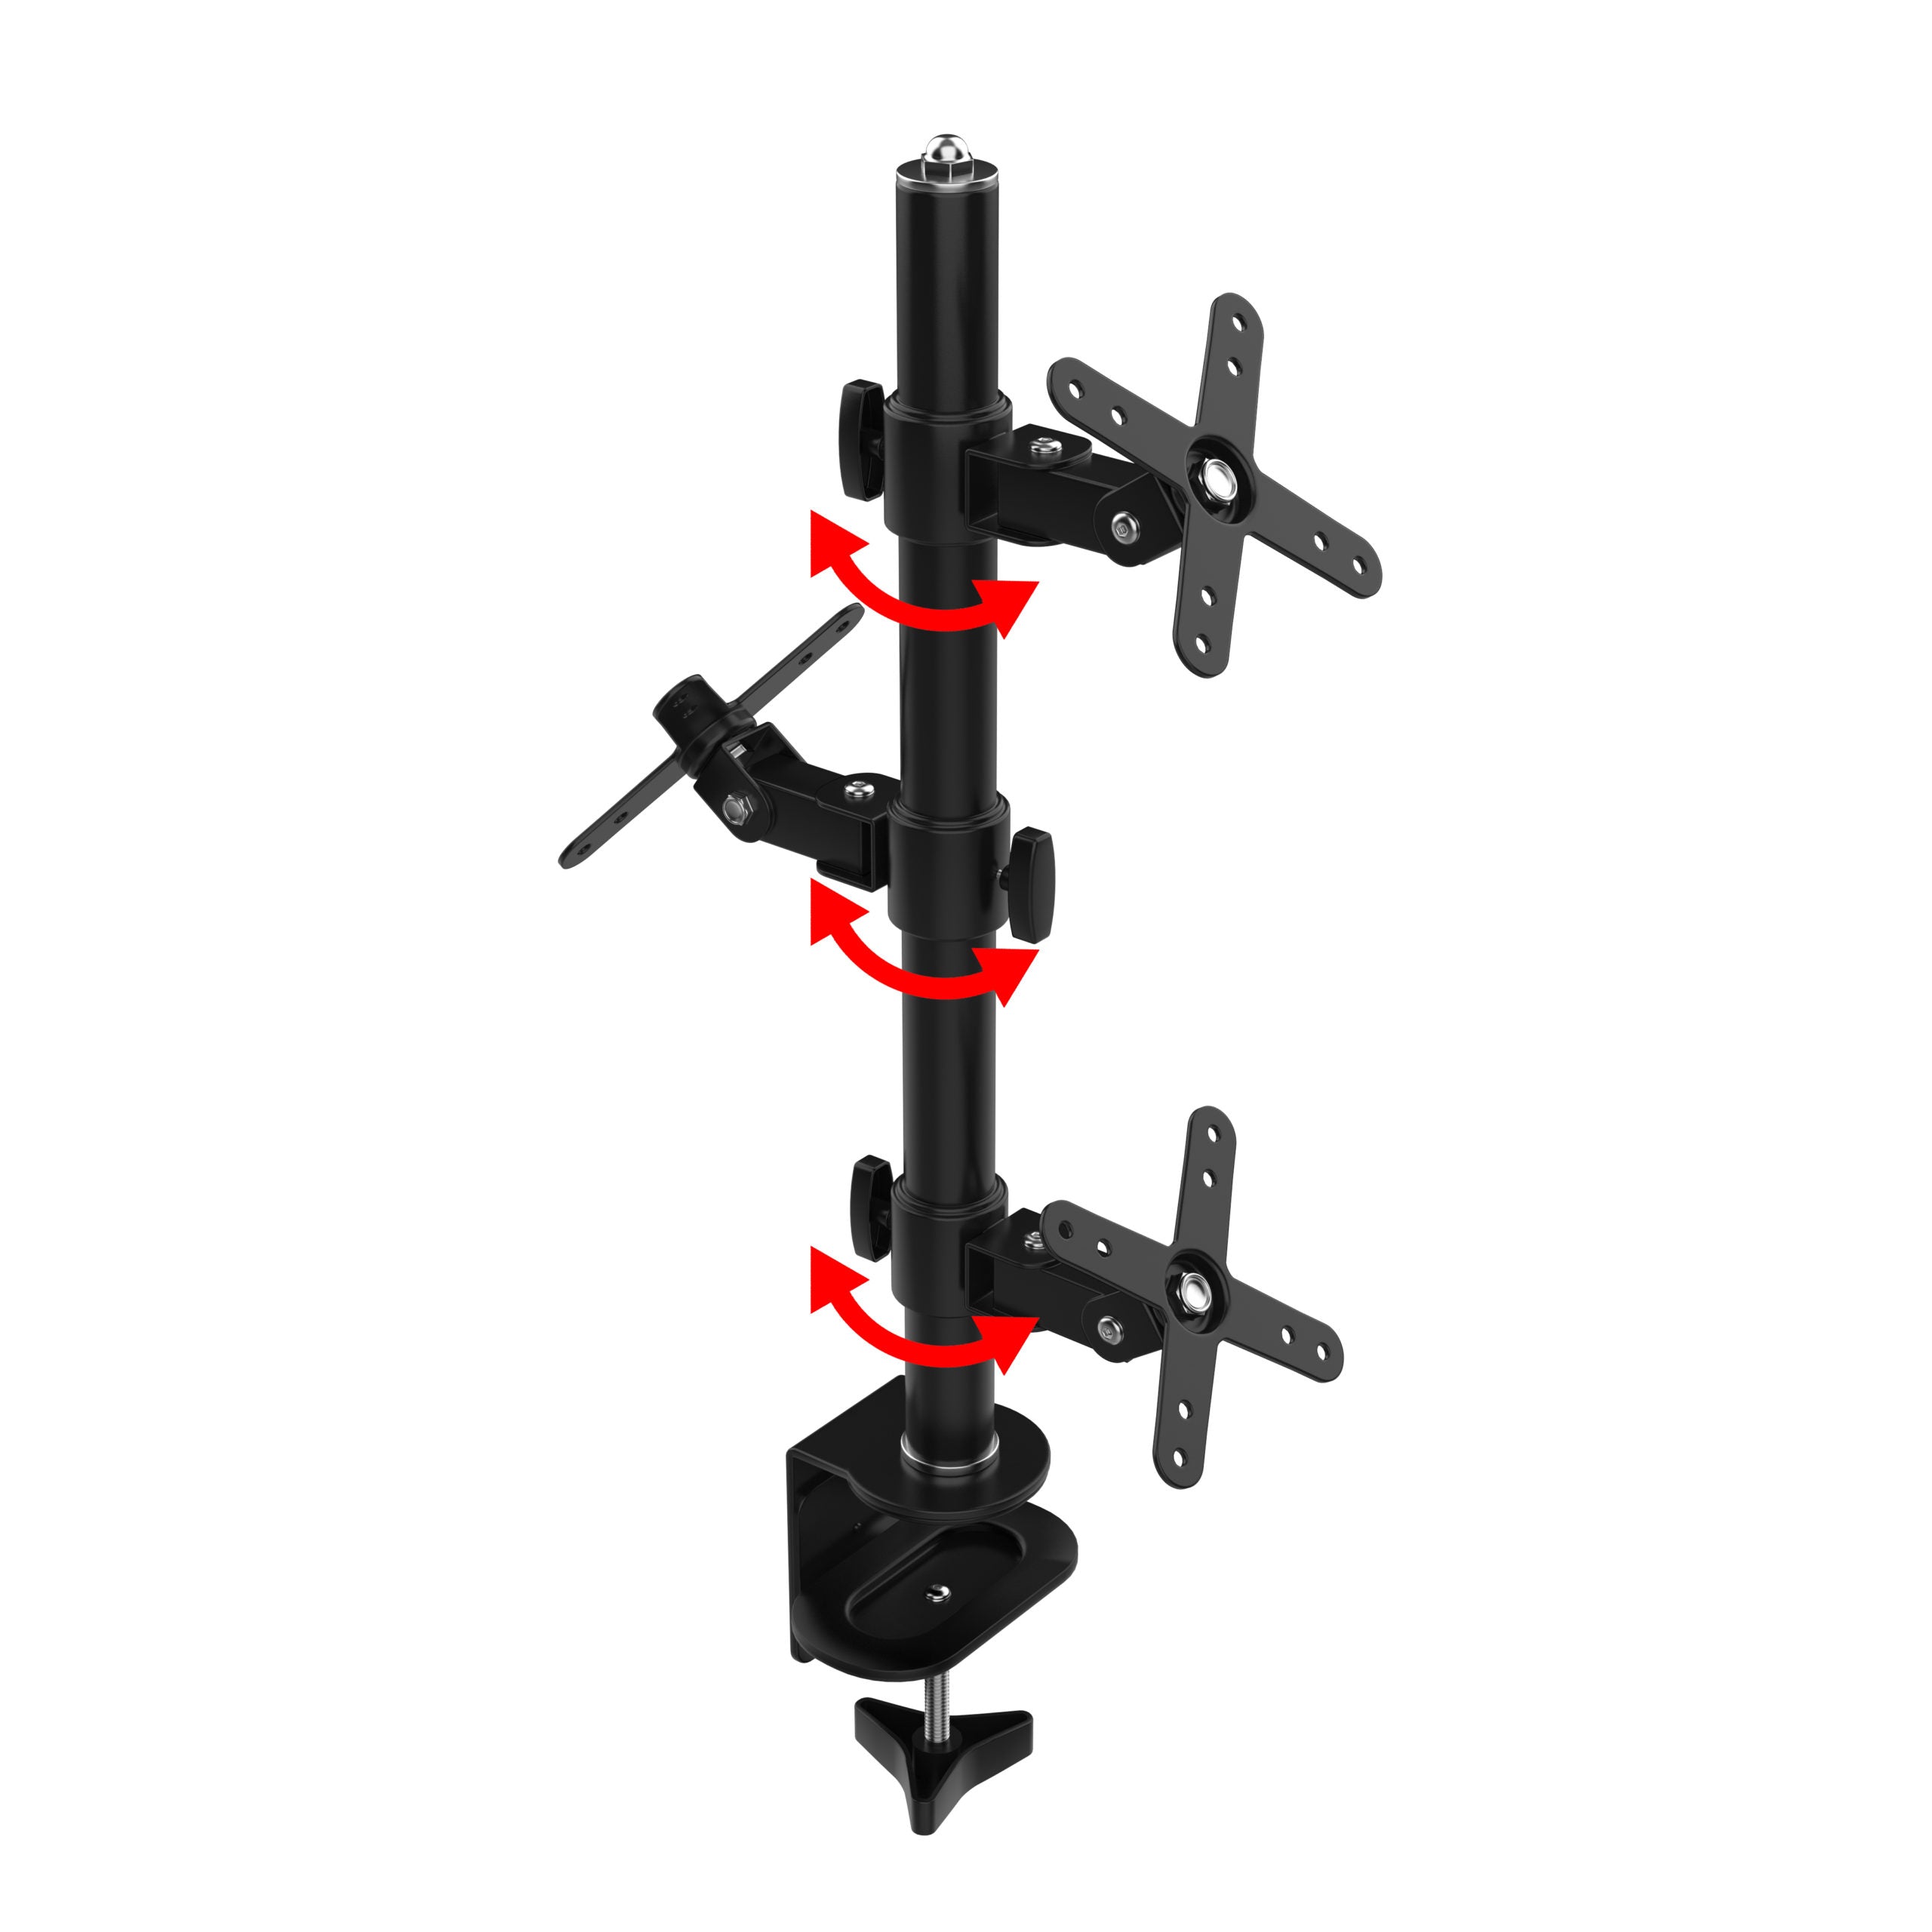 Clamp Pole with 3 Adjustable VESA Plates for Customized Delivery Service Solution